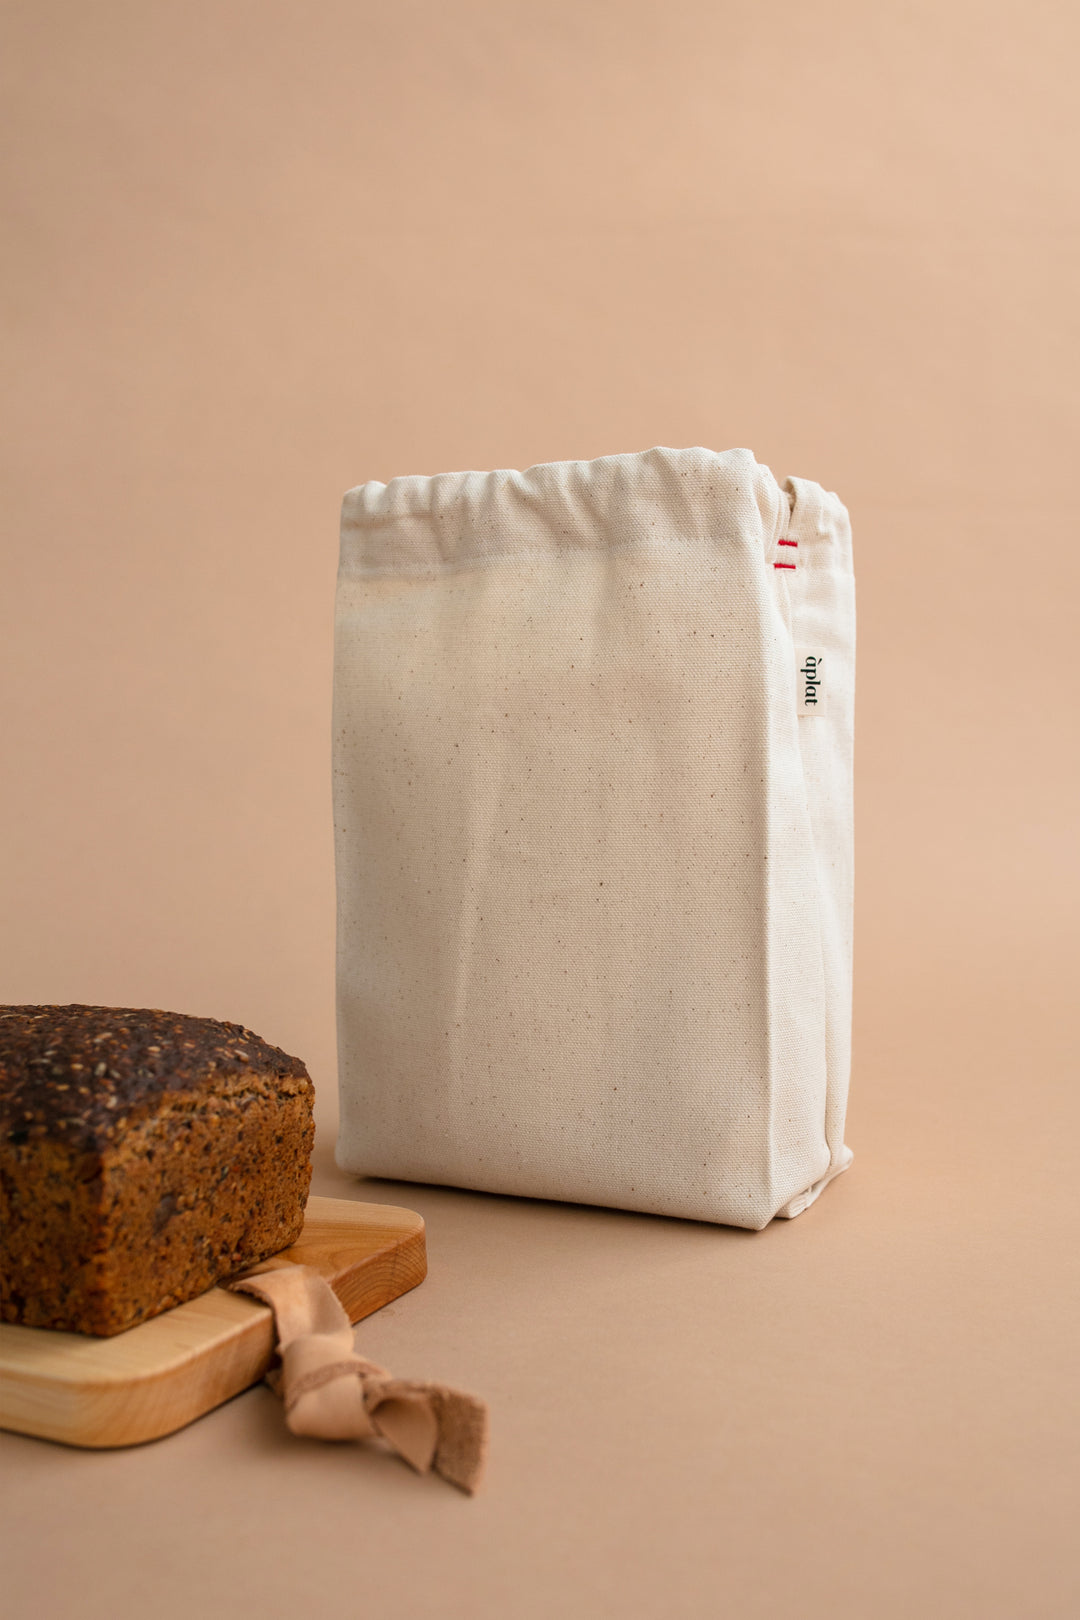 Storage Bag Breathable Durable Extra Large Bread Drawstring Bags